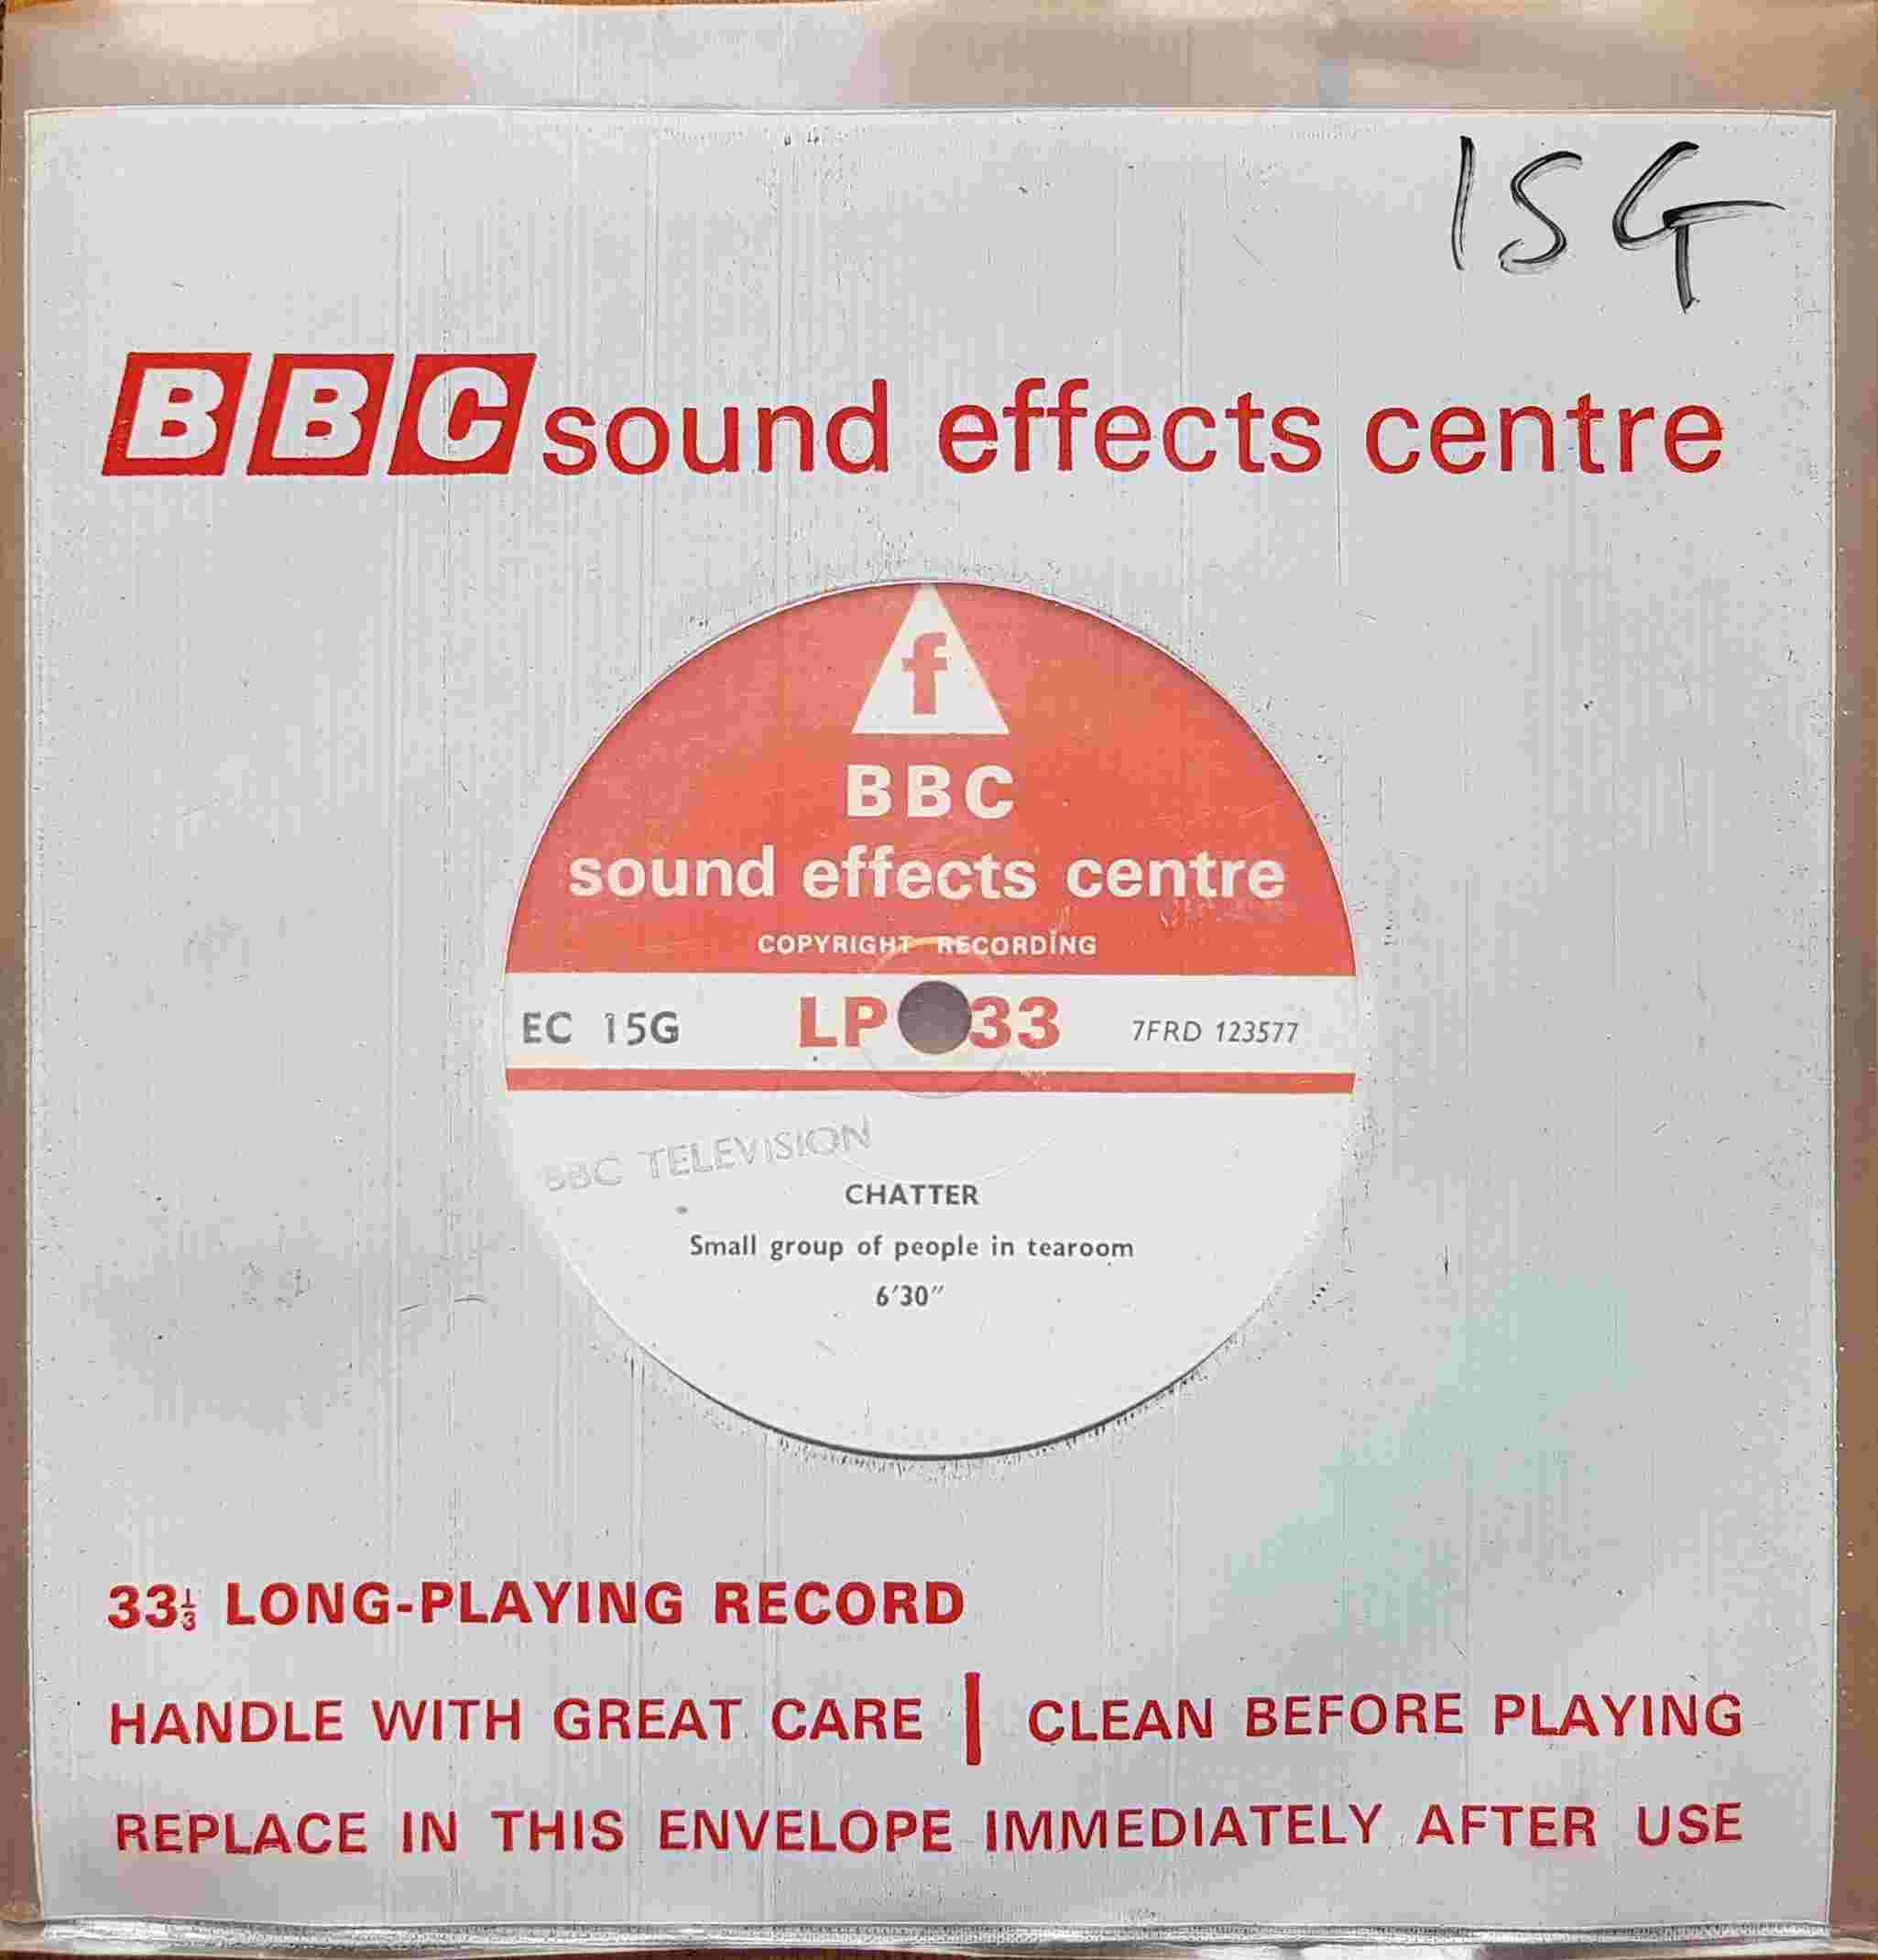 Picture of EC 15G Chatter by artist Not registered from the BBC singles - Records and Tapes library